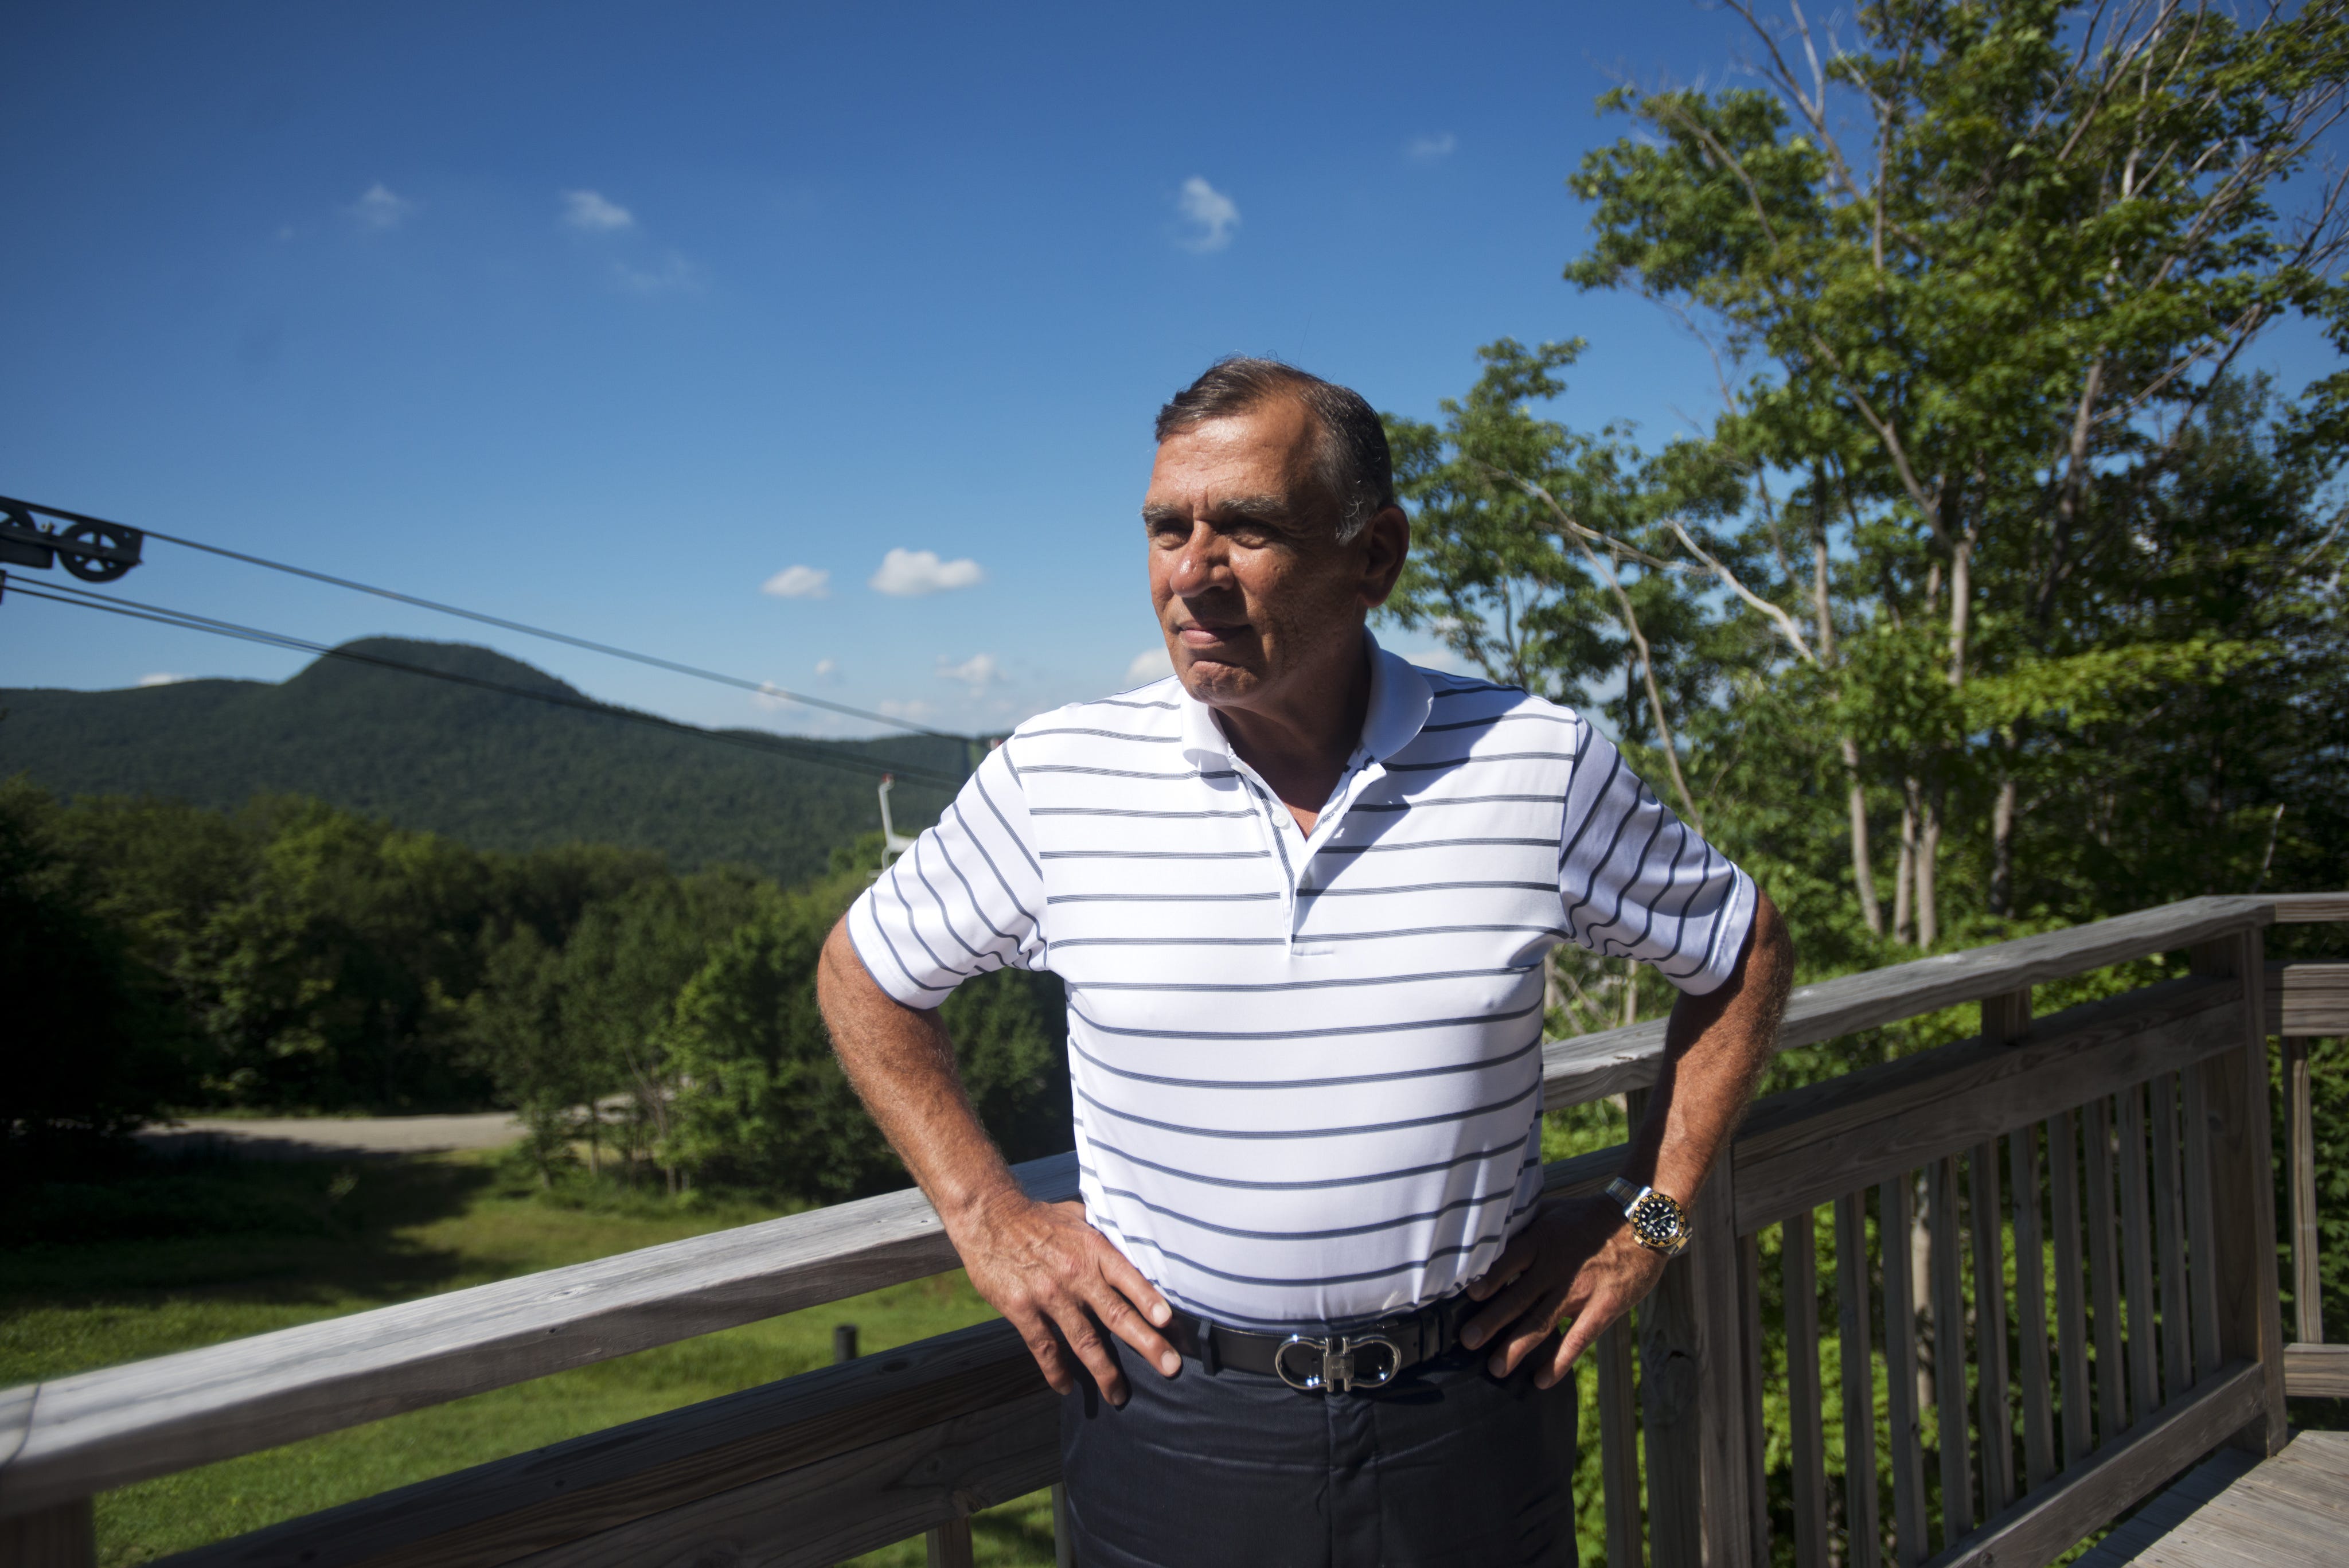 Ariel Quiros, co-owner of Jay Peak and Bill Stenger's business partner, stands on the porch of his condo at Jay Peak in 2013.